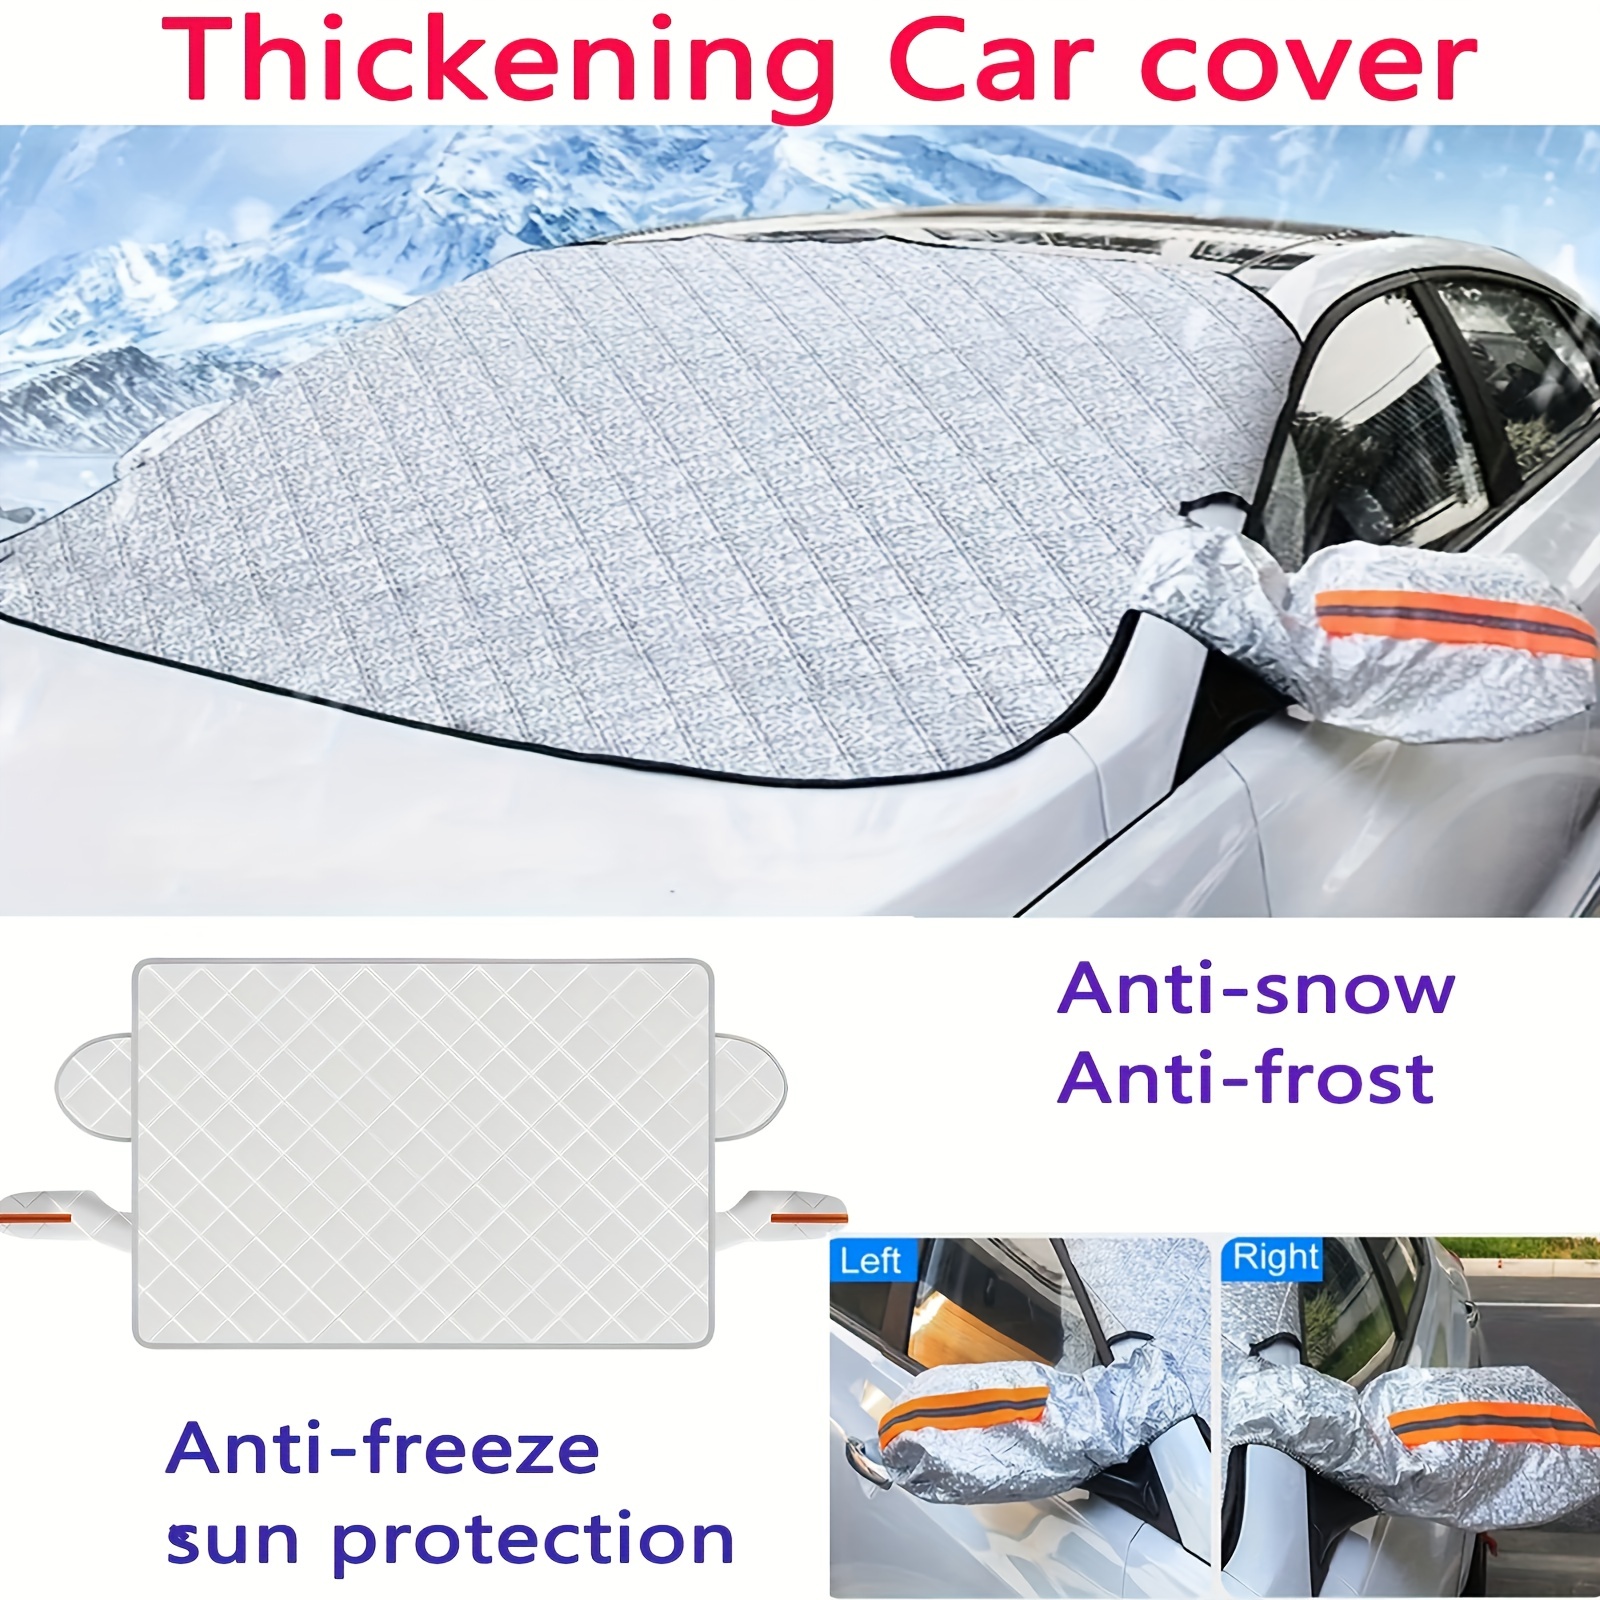 

Universal Car Windshield Protective Cover Antisnow Antifreeze Antifrost Rainproof Sun Protection Magnet 7 Layers Strengthened Material Car Cover